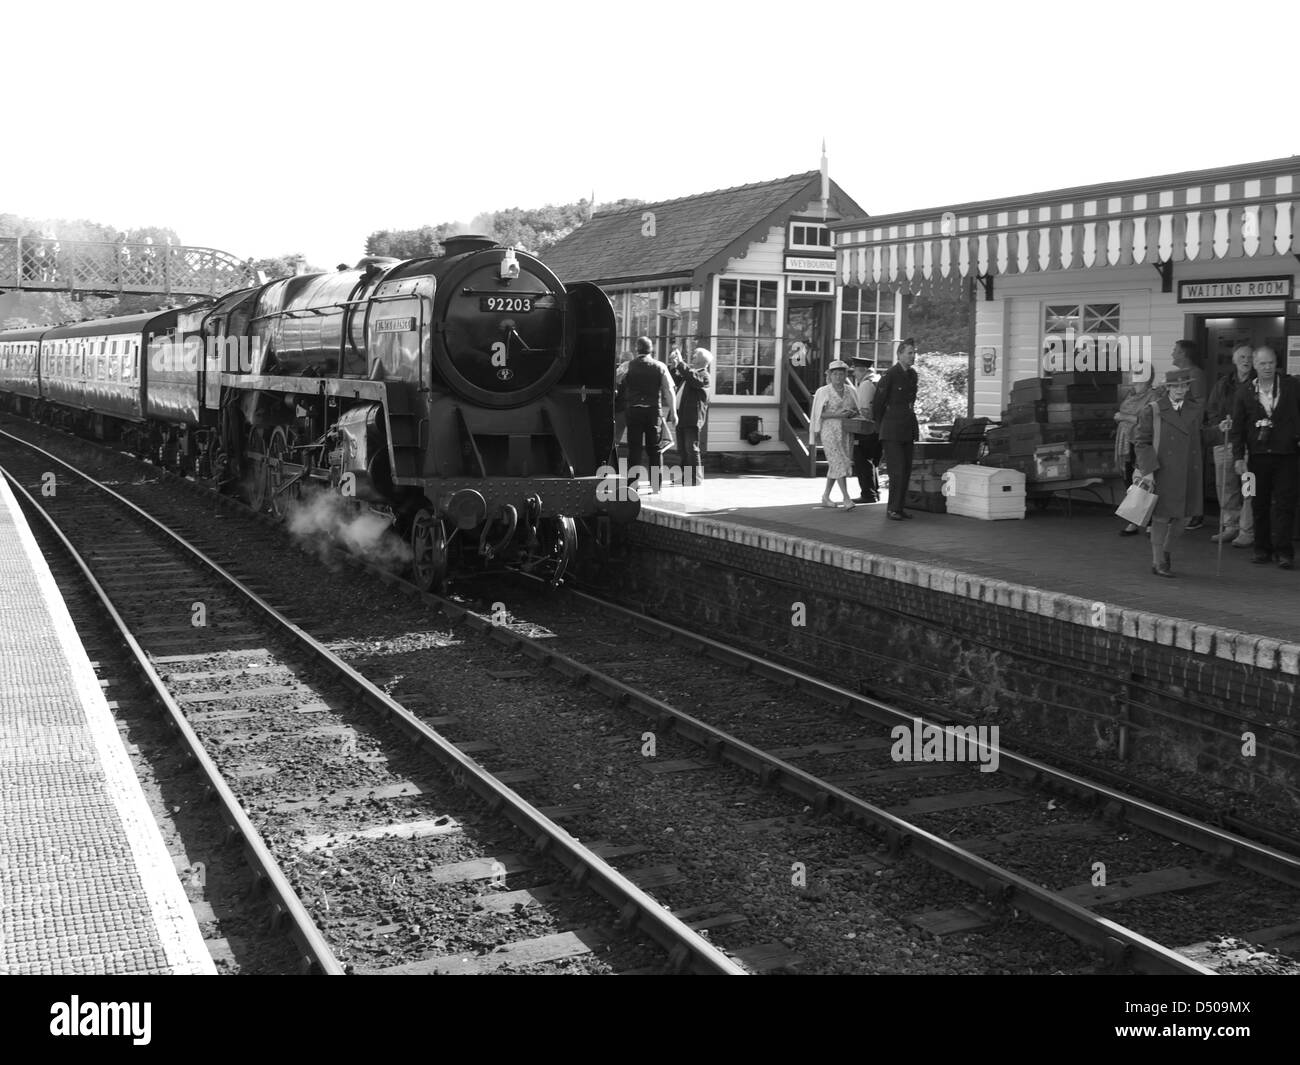 Weybourne Station with steam loco number 92203 and various reenactors during North Norfolk railway 1940's weekend Stock Photo